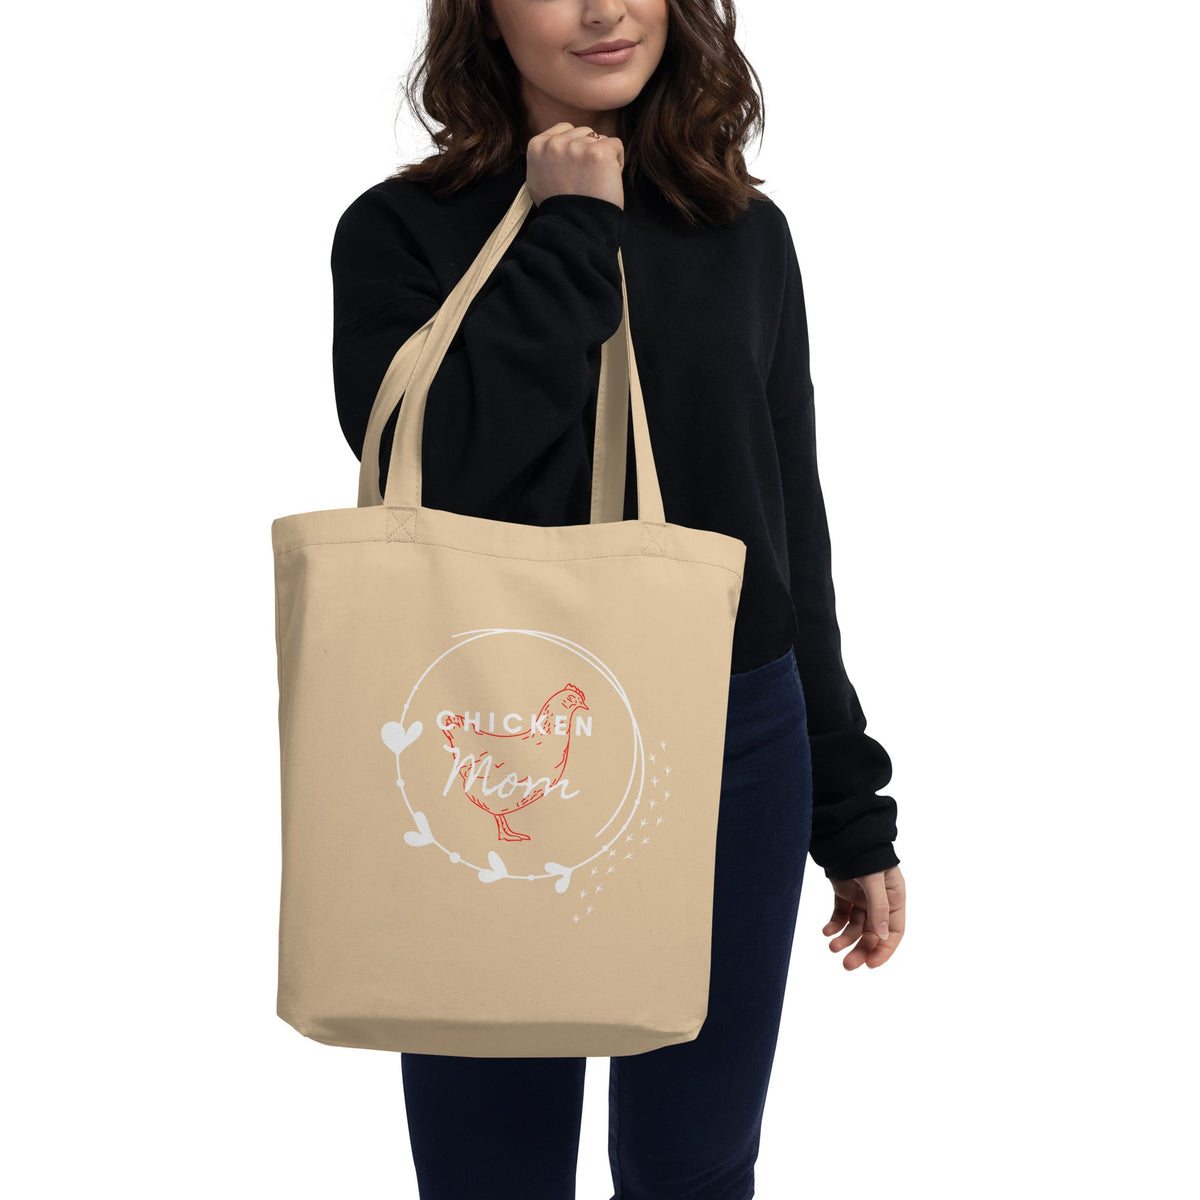 Chicken Mom Eco Tote Bag - Cluck It All Farms